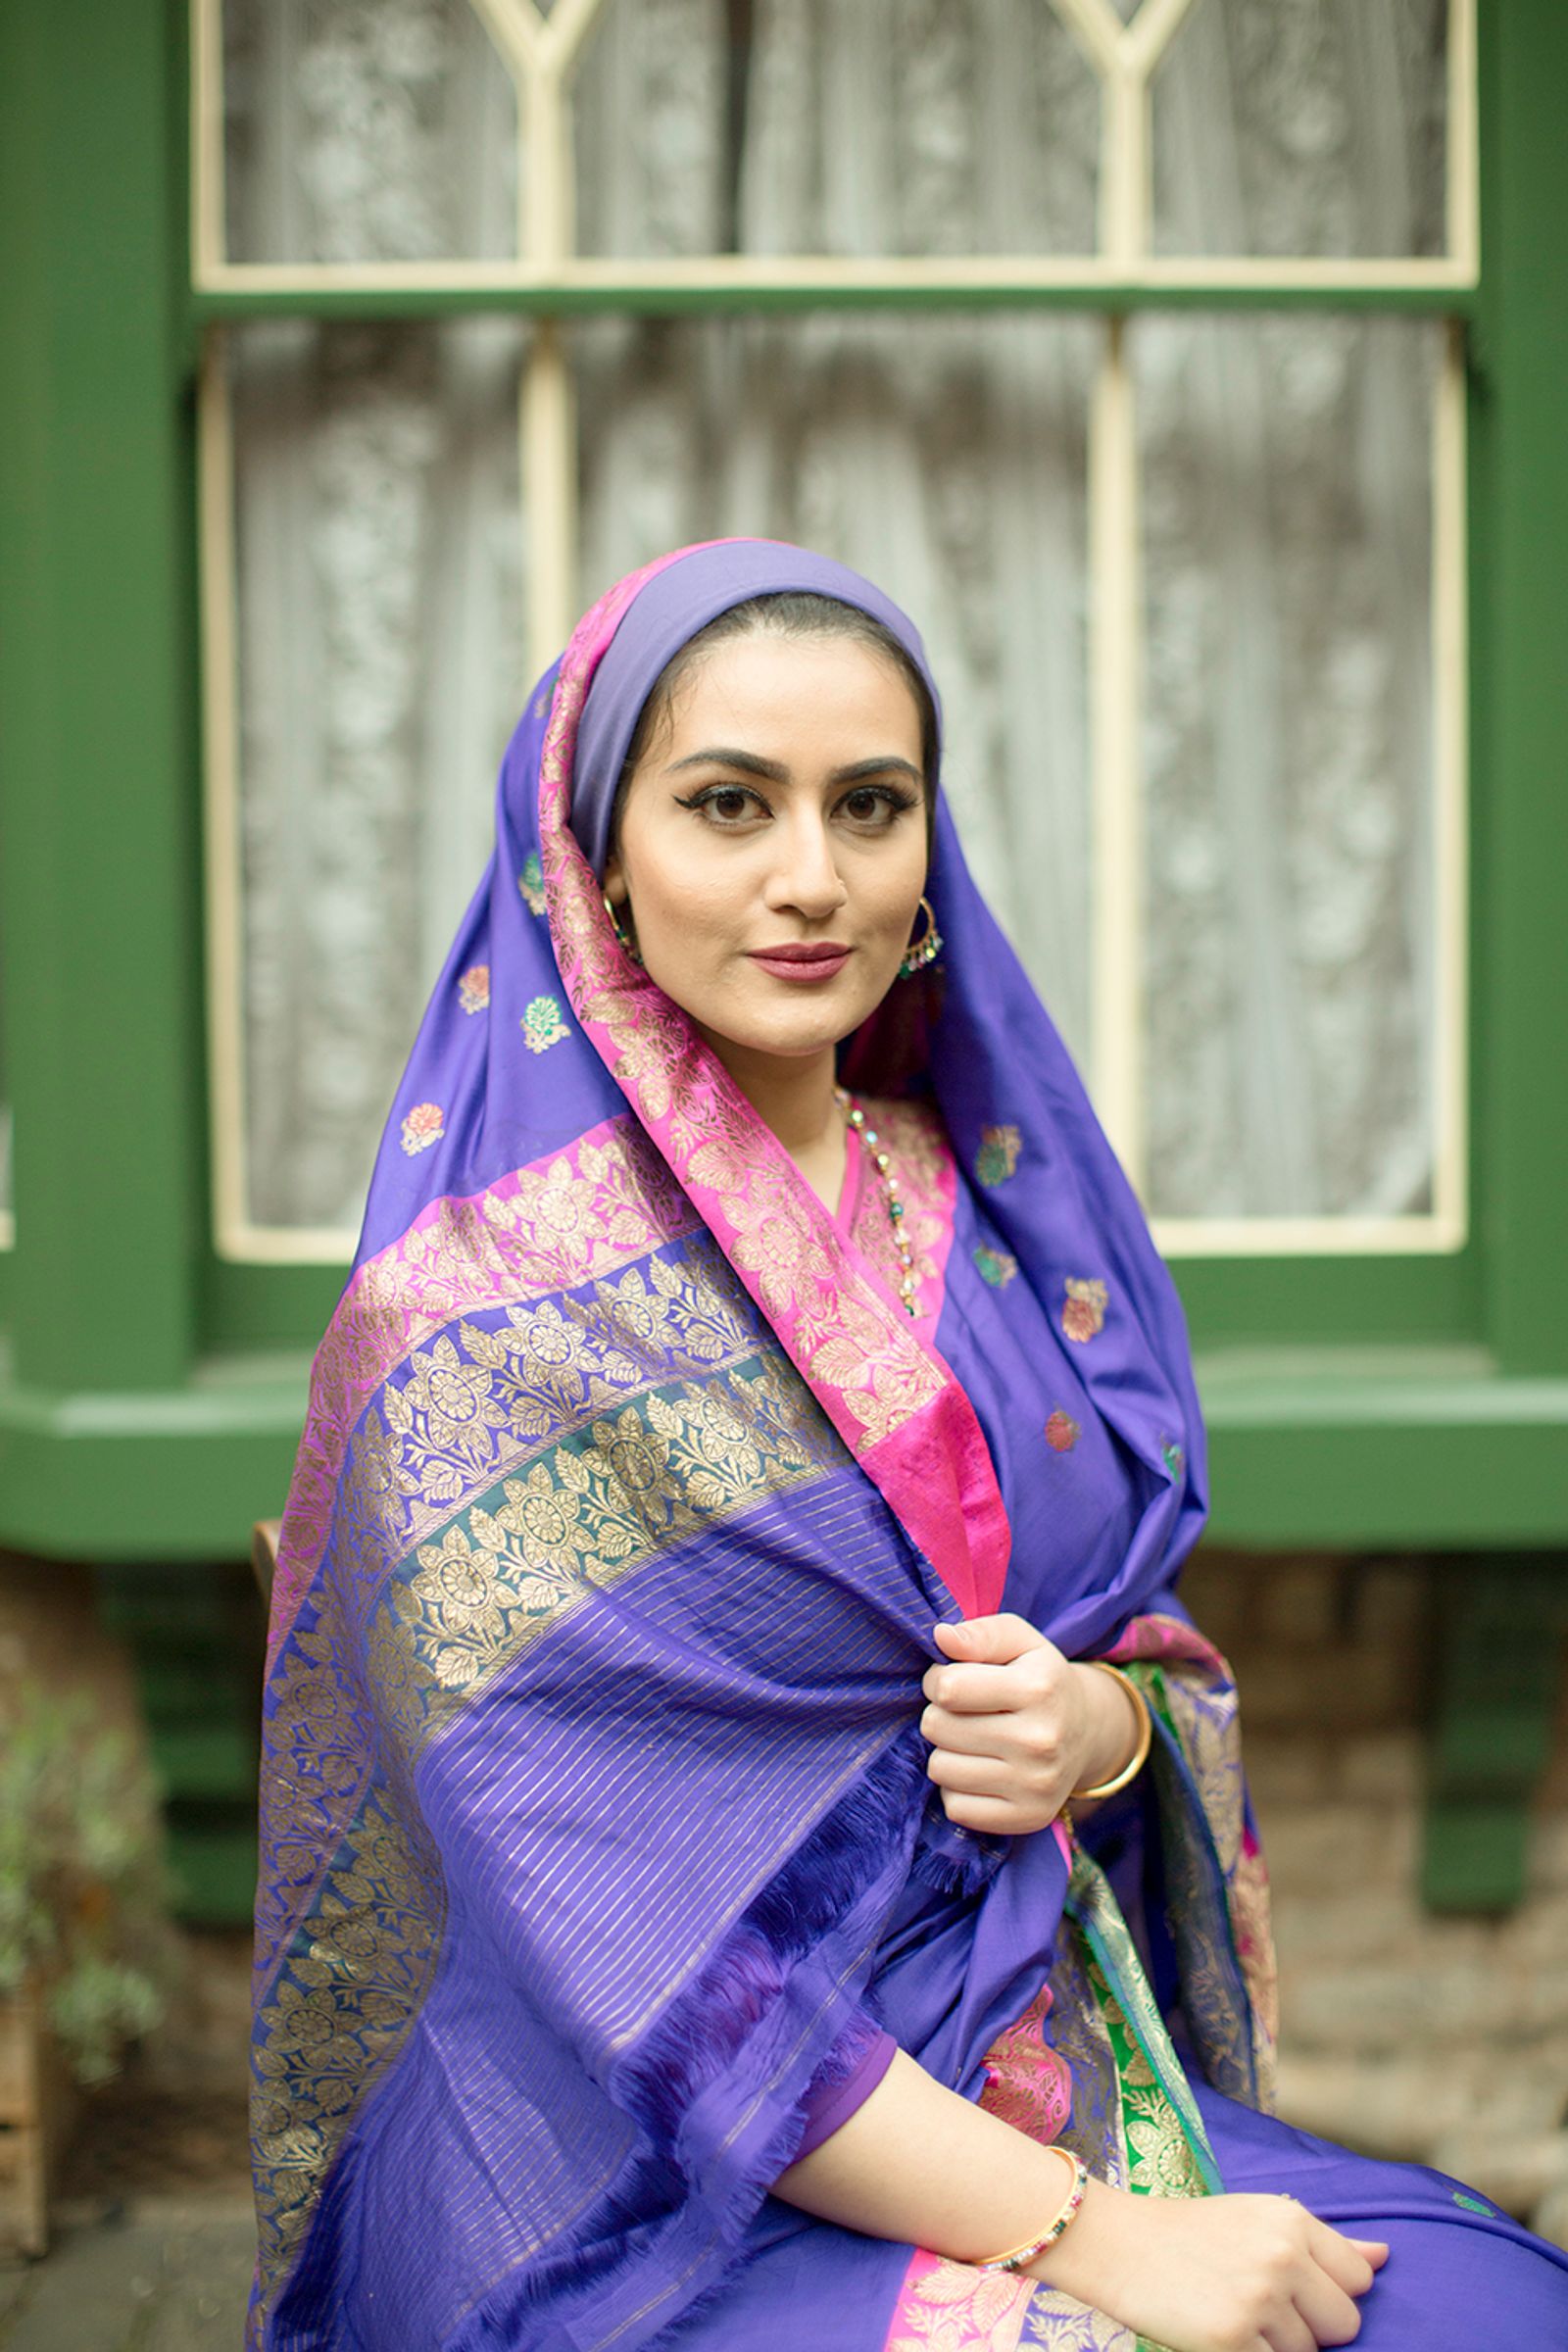 © Maryam Wahid - Image from the Women From The Pakistani Diaspora In Britain photography project